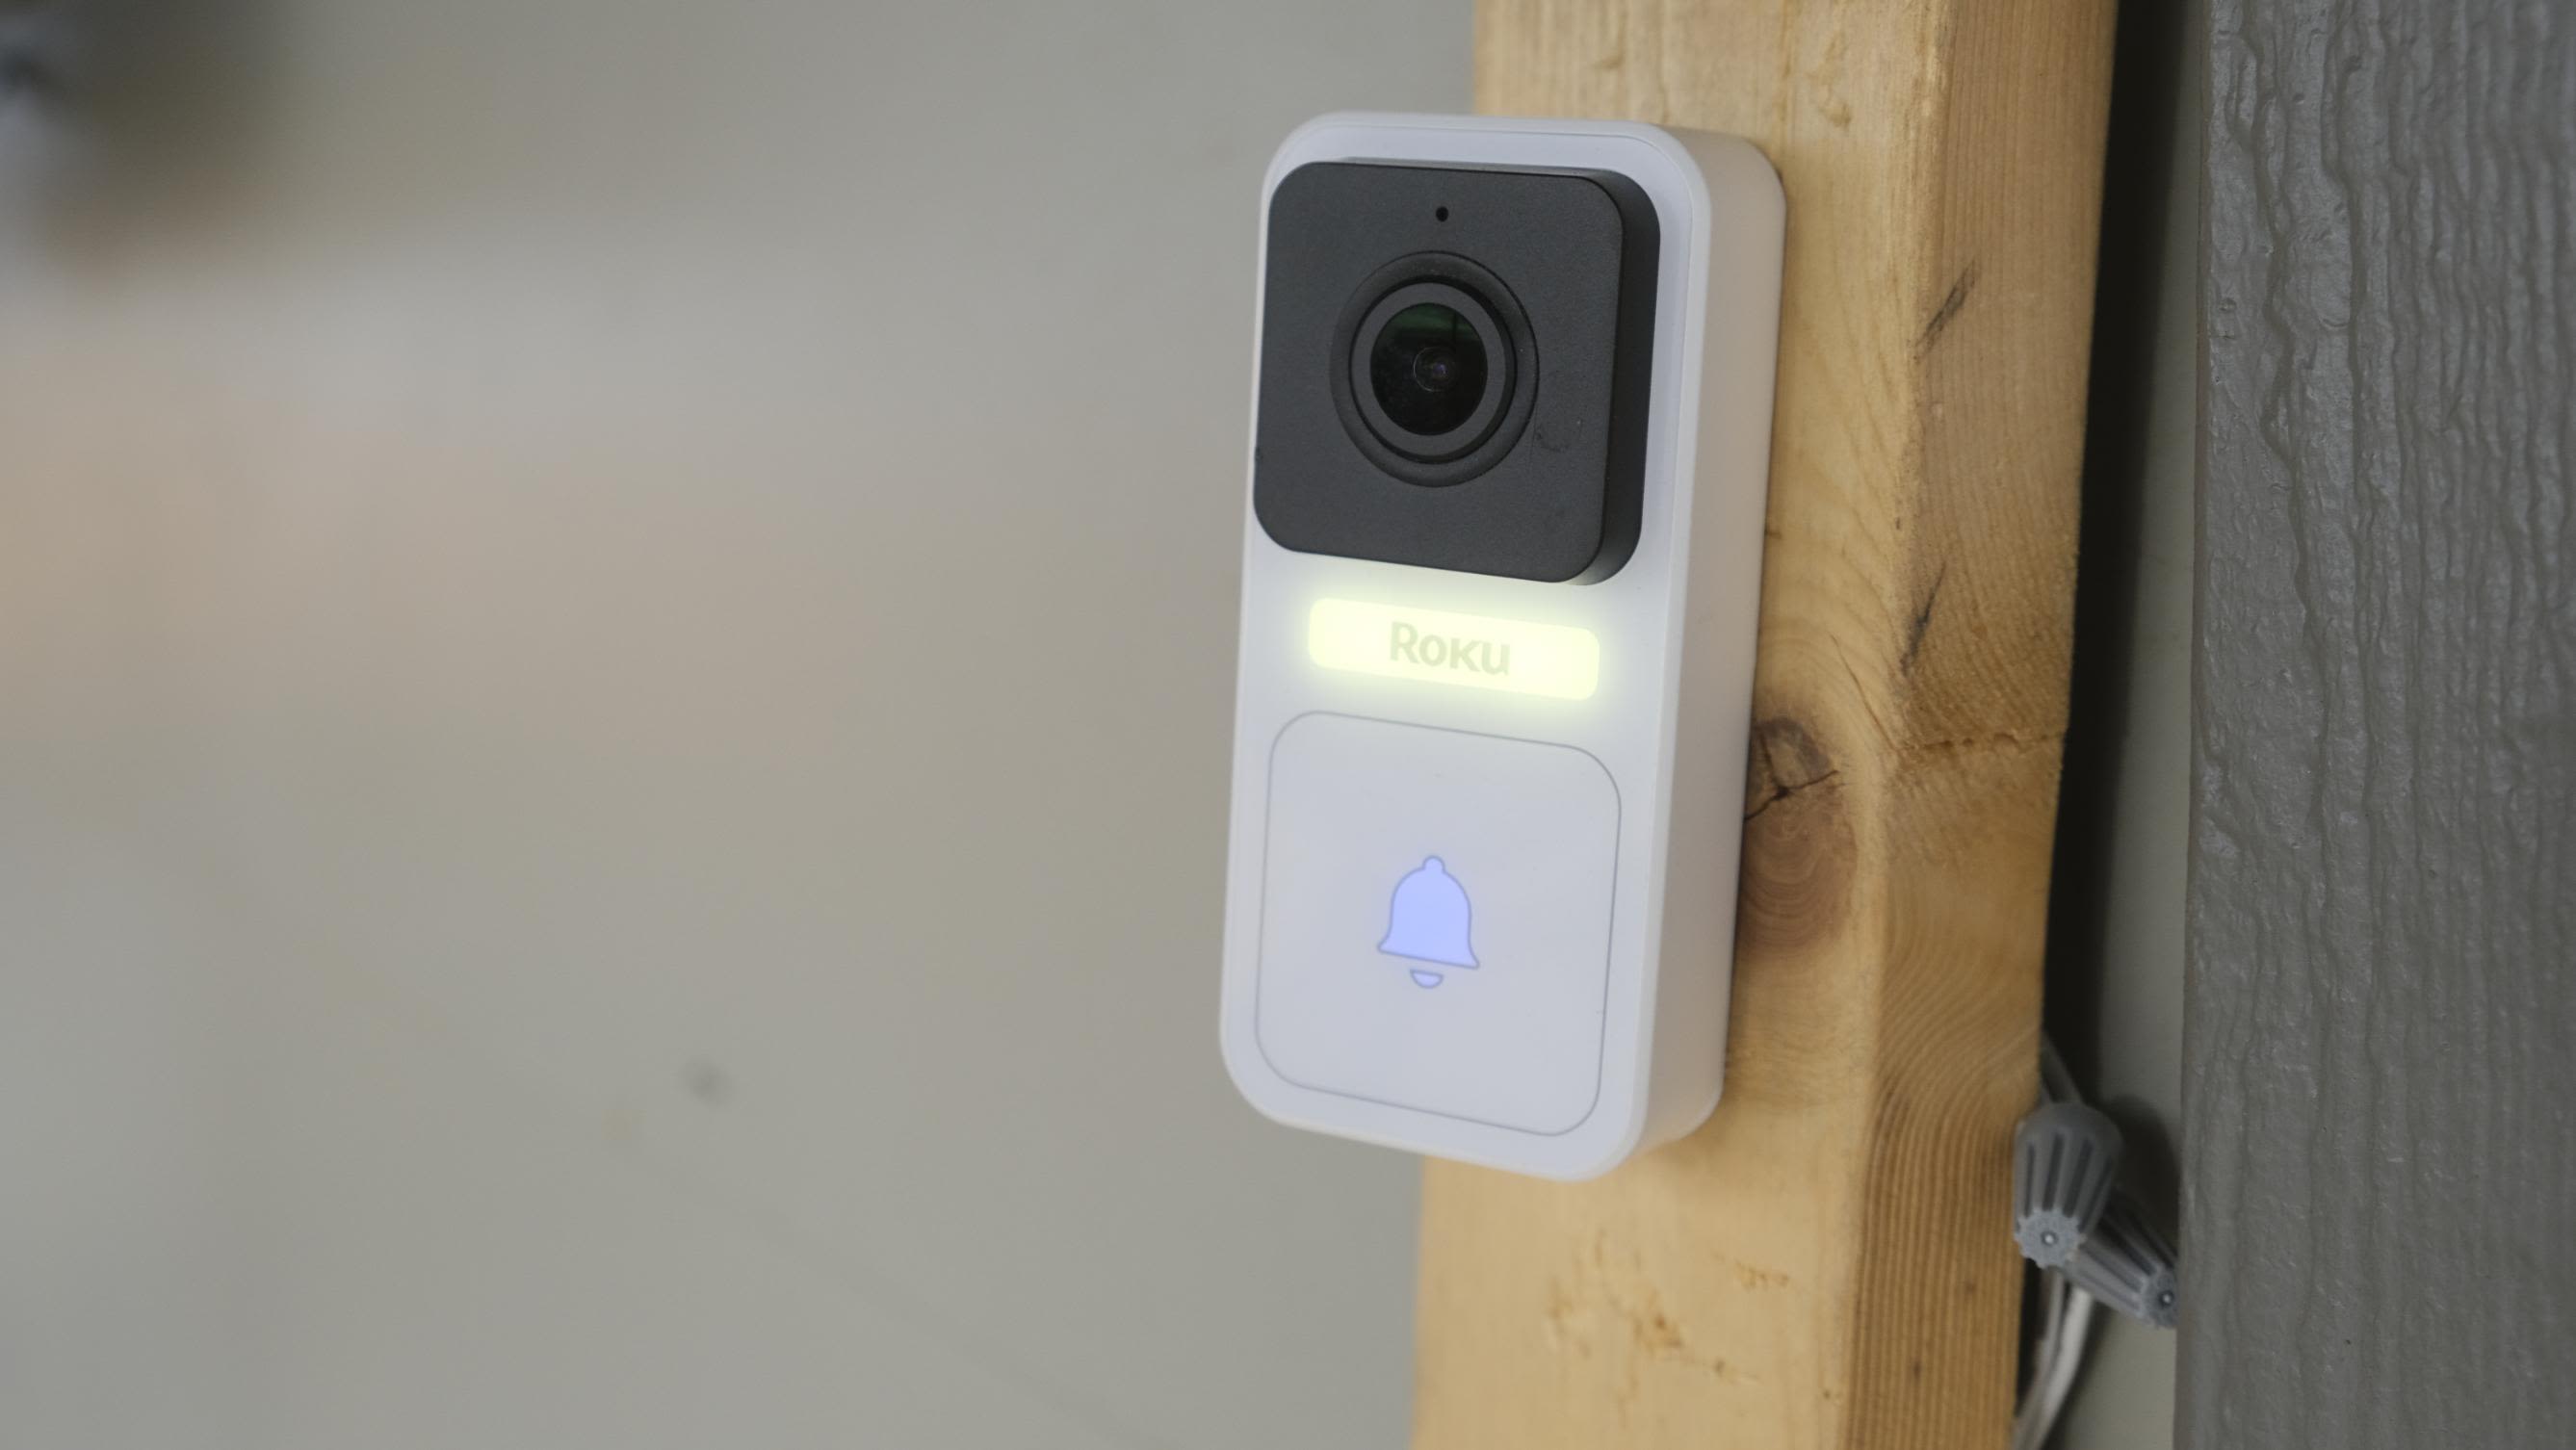 Ring Video Doorbell 3 Home Security Camera Review - Consumer Reports